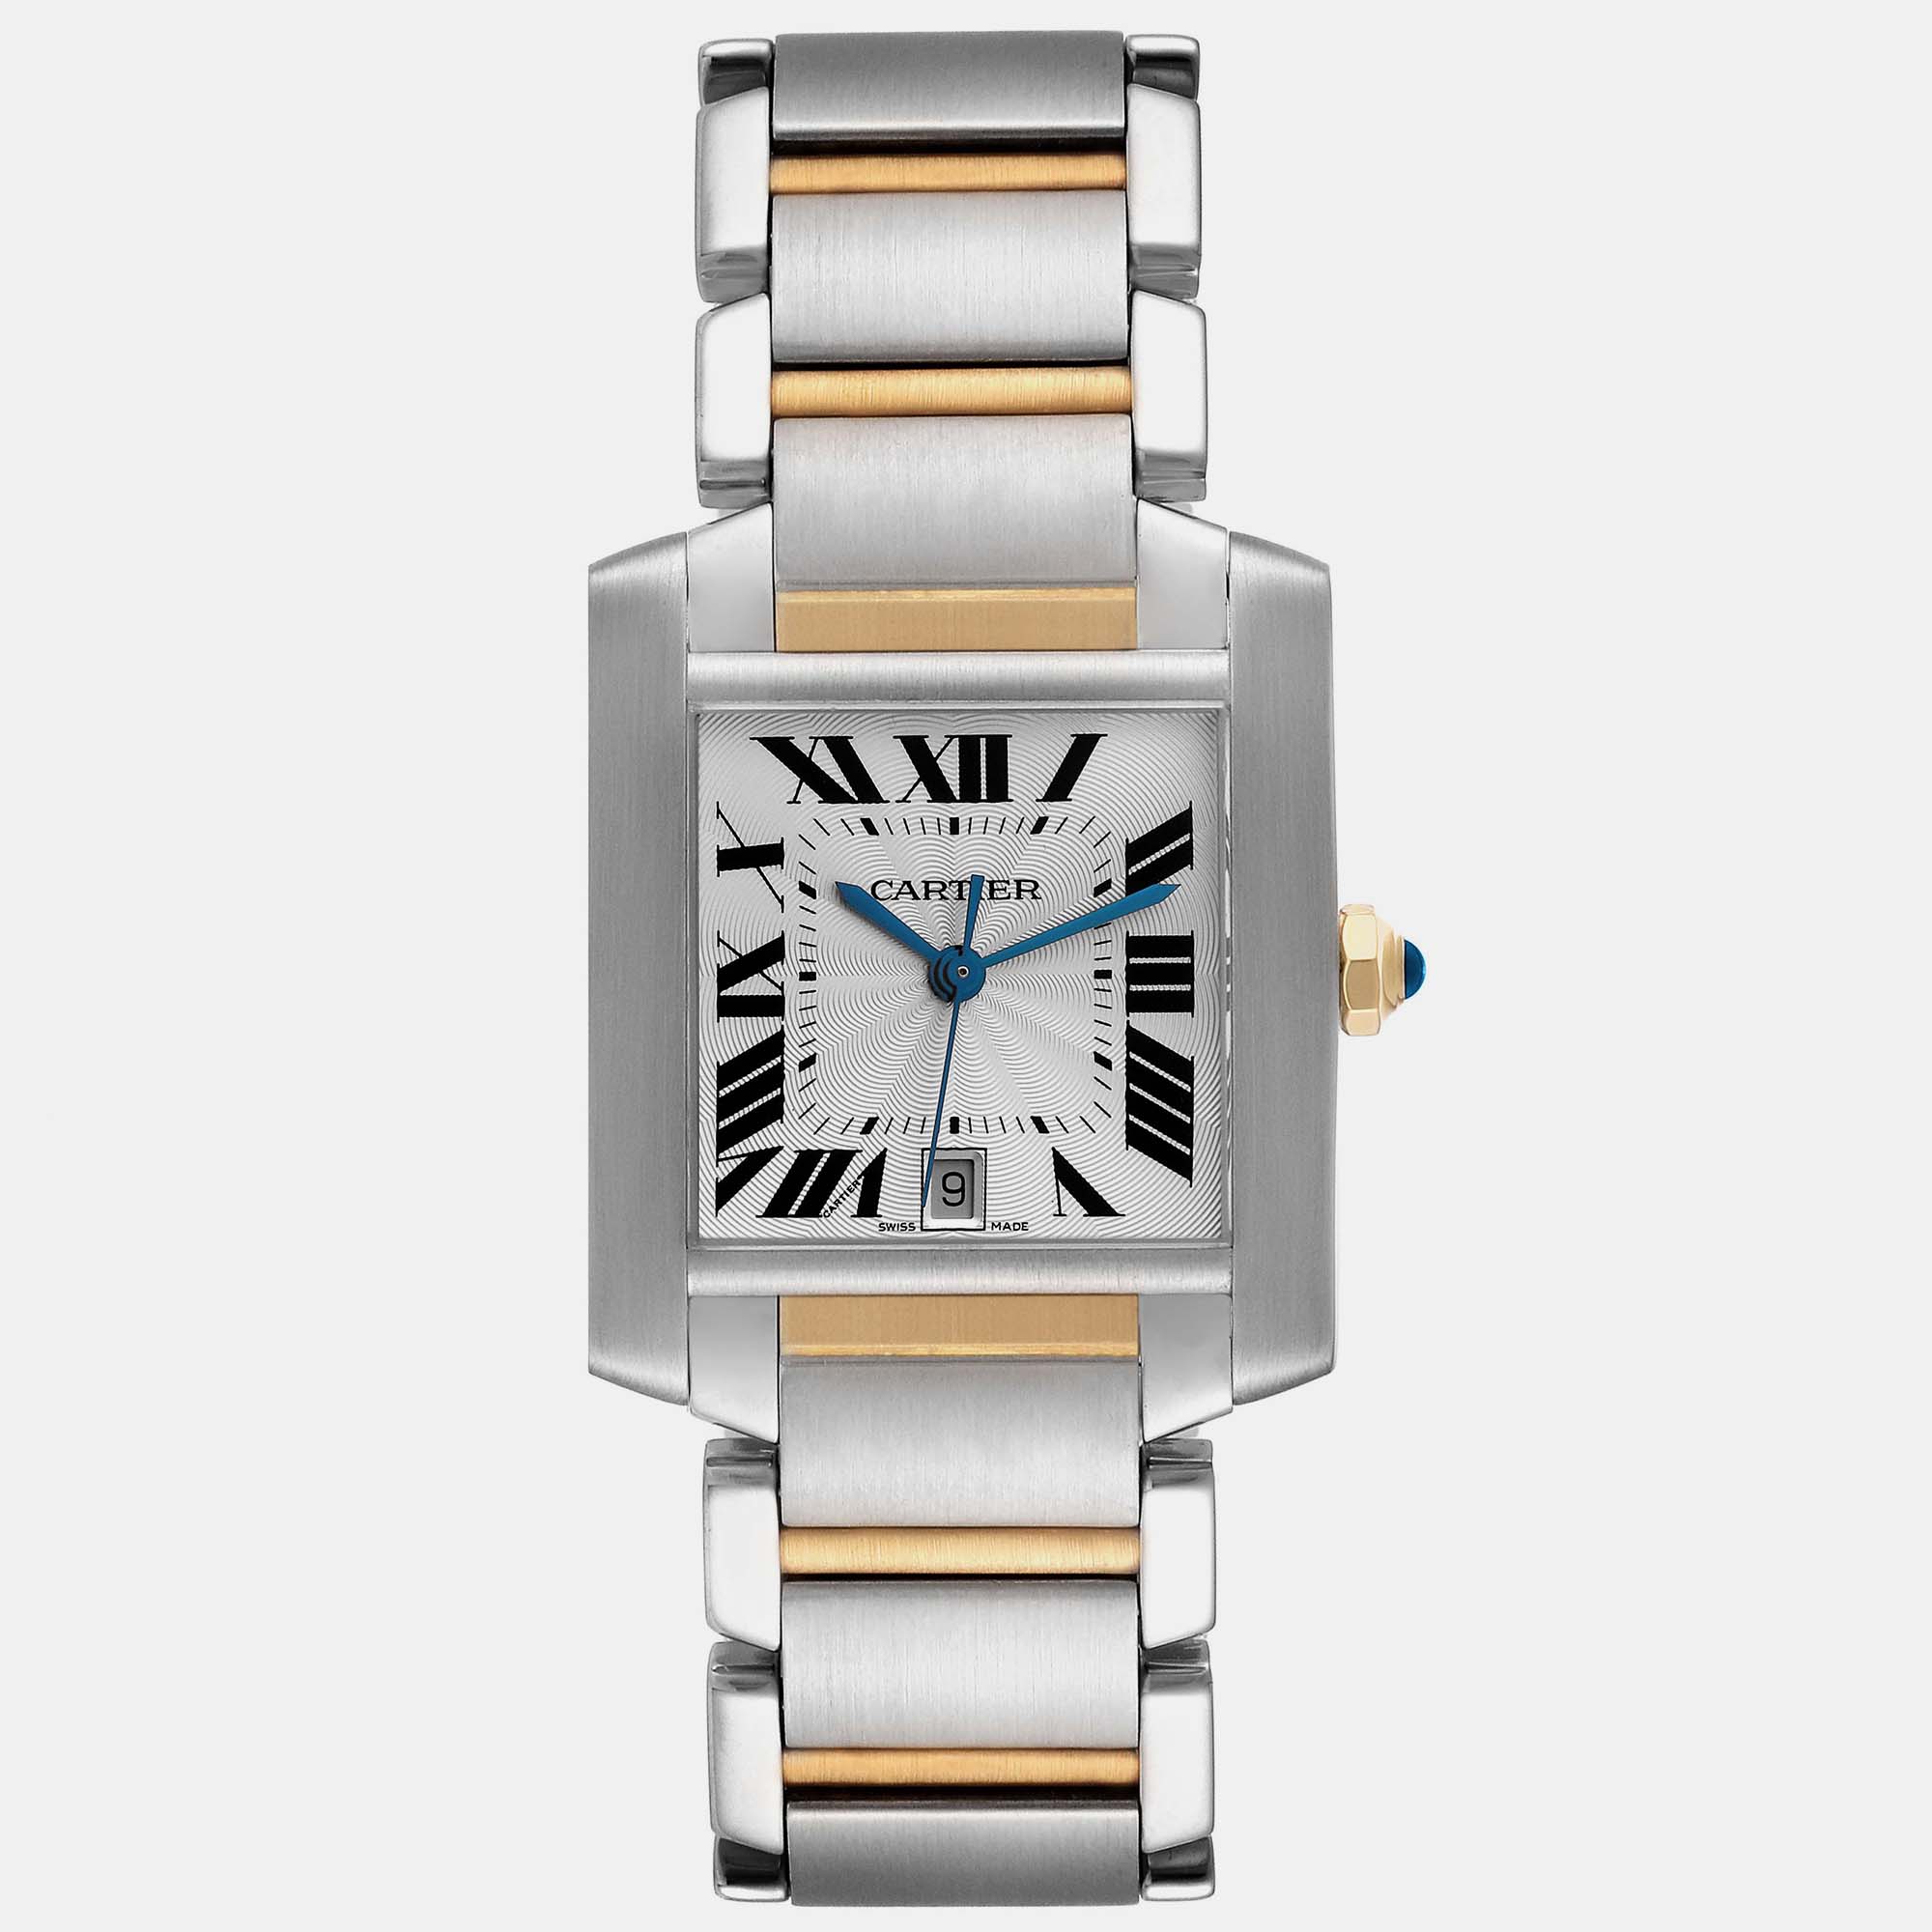 Cartier tank francaise steel yellow gold silver dial mens watch w51005q4 28.0 mm x 32.0 mm